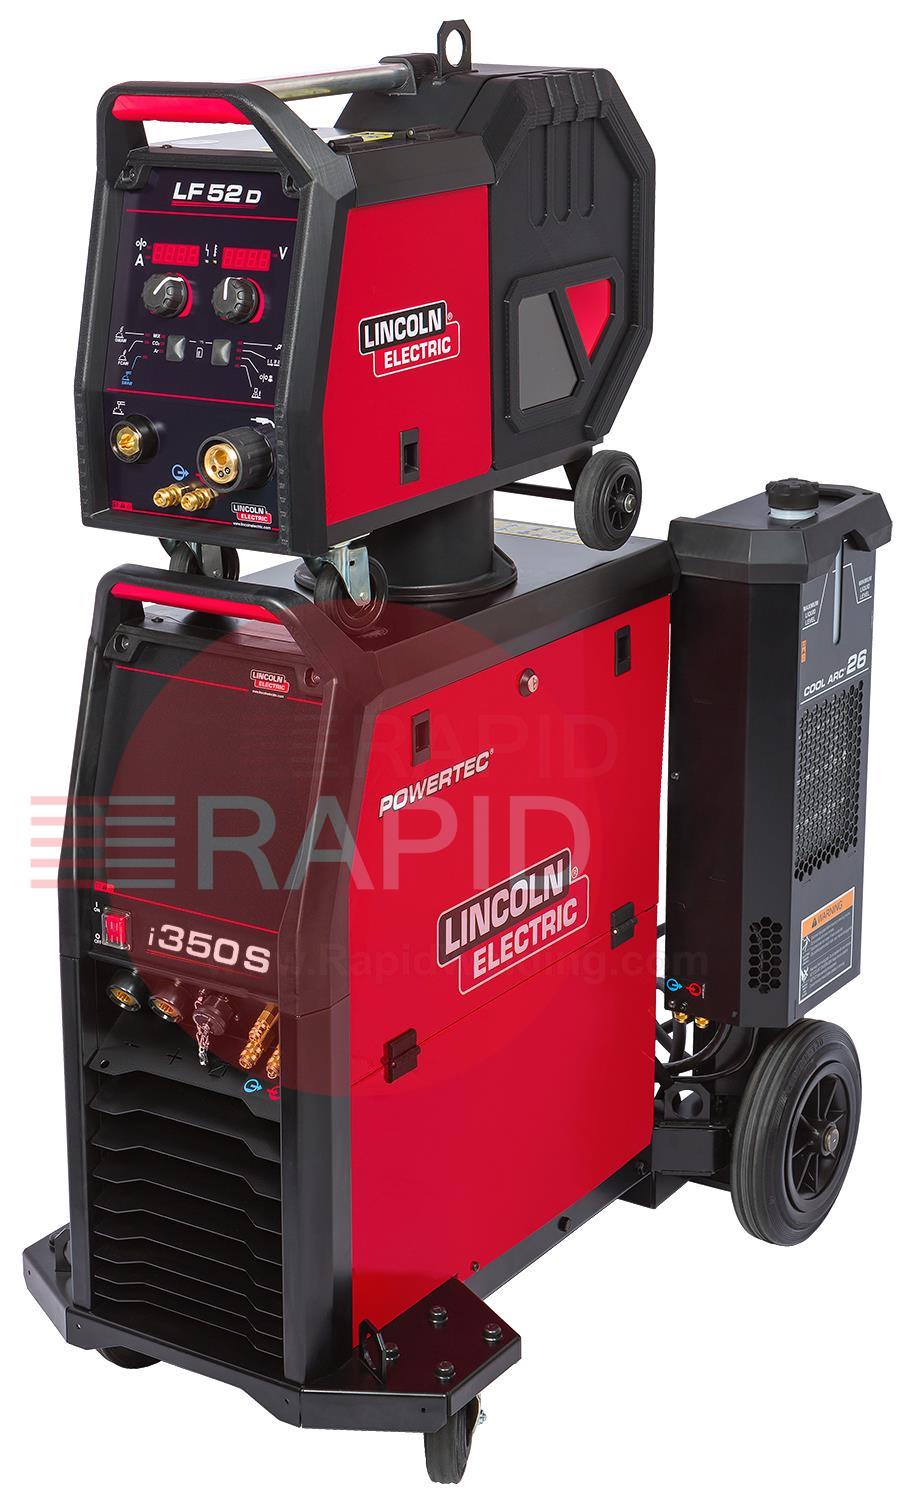 K14183-52-1WP  Lincoln Powertec i350S MIG Welder & LF-52D Wire Feeder Water Cooled Ready To Weld Package - 400v, 3ph